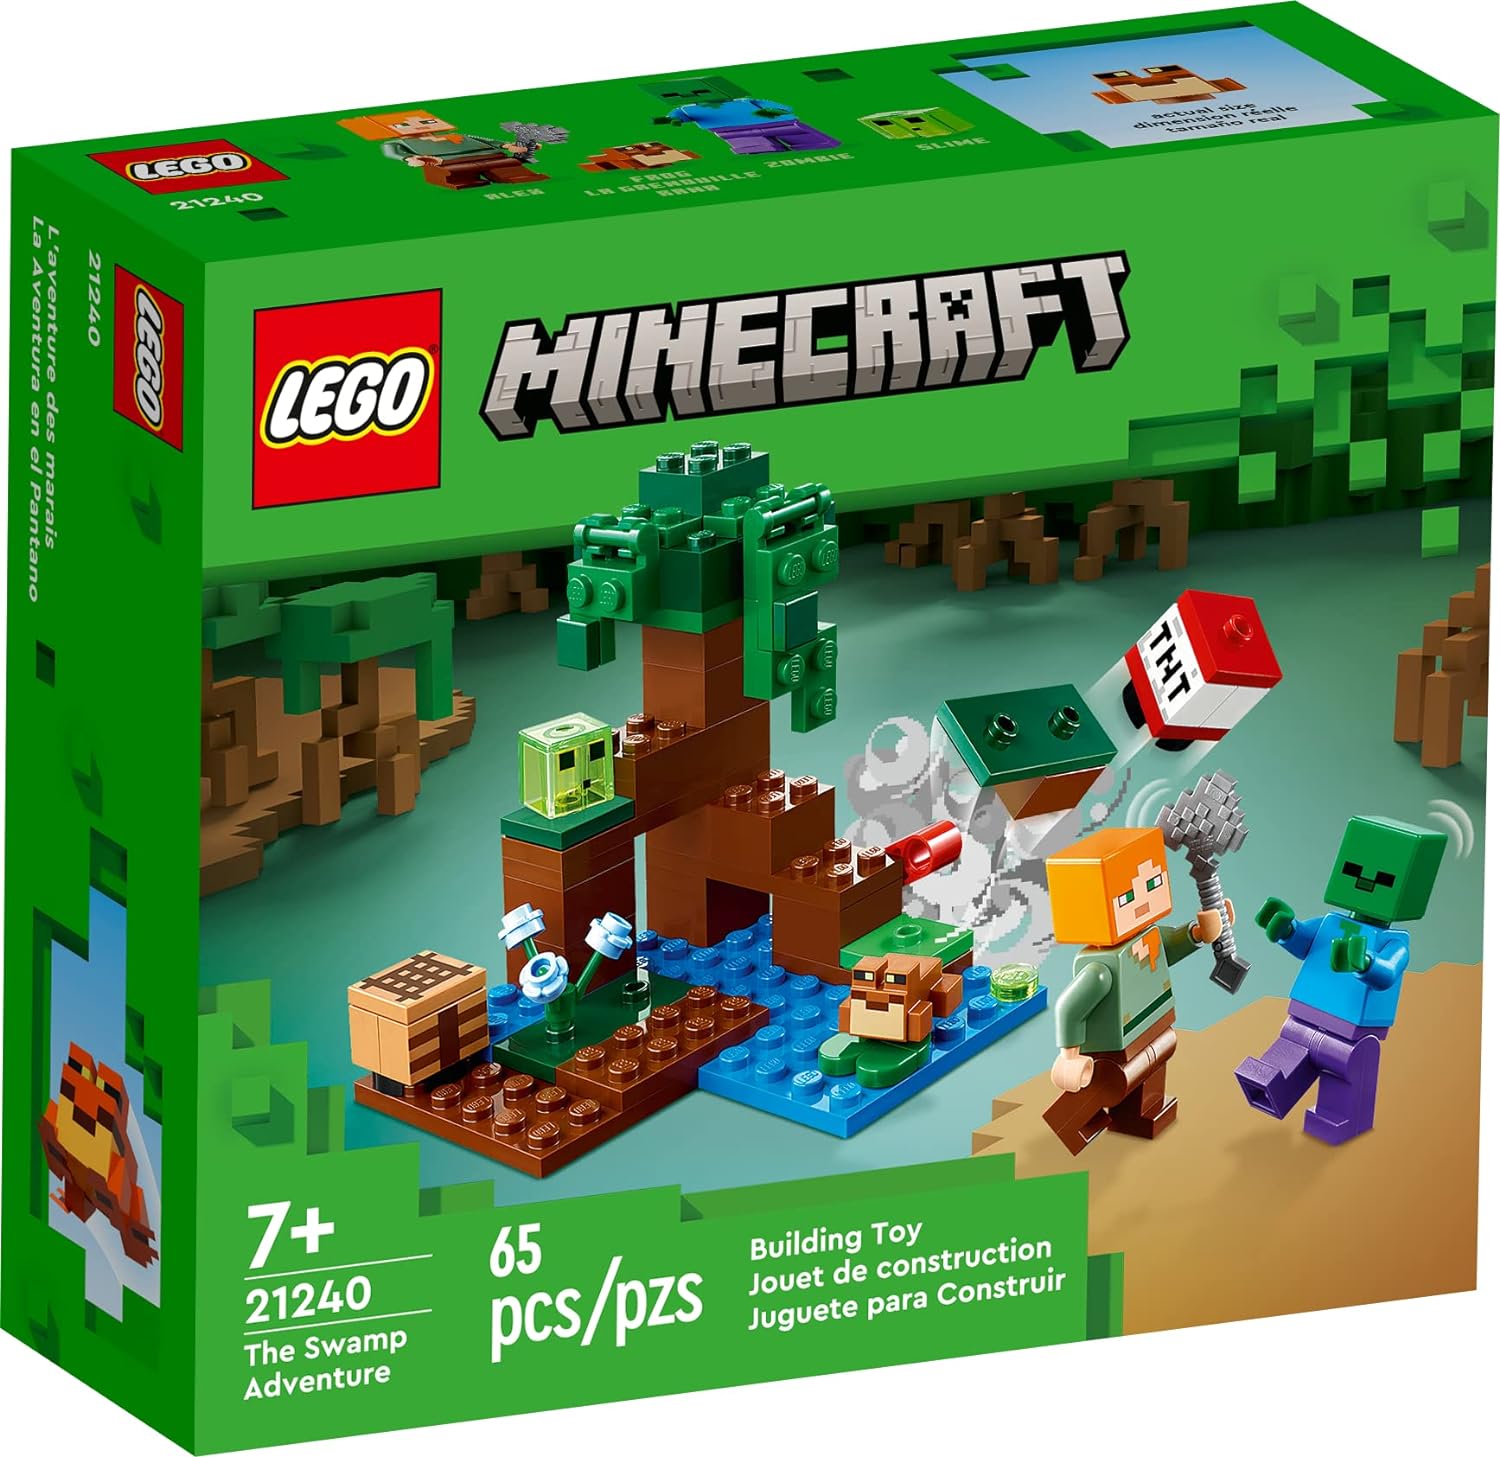 LEGO 21240 Minecraft The Swamp Adventure , Building Game Construction Toy with Alex and Zombie Figures in Biome, Birthday Gift Idea for Kids Ages 8+